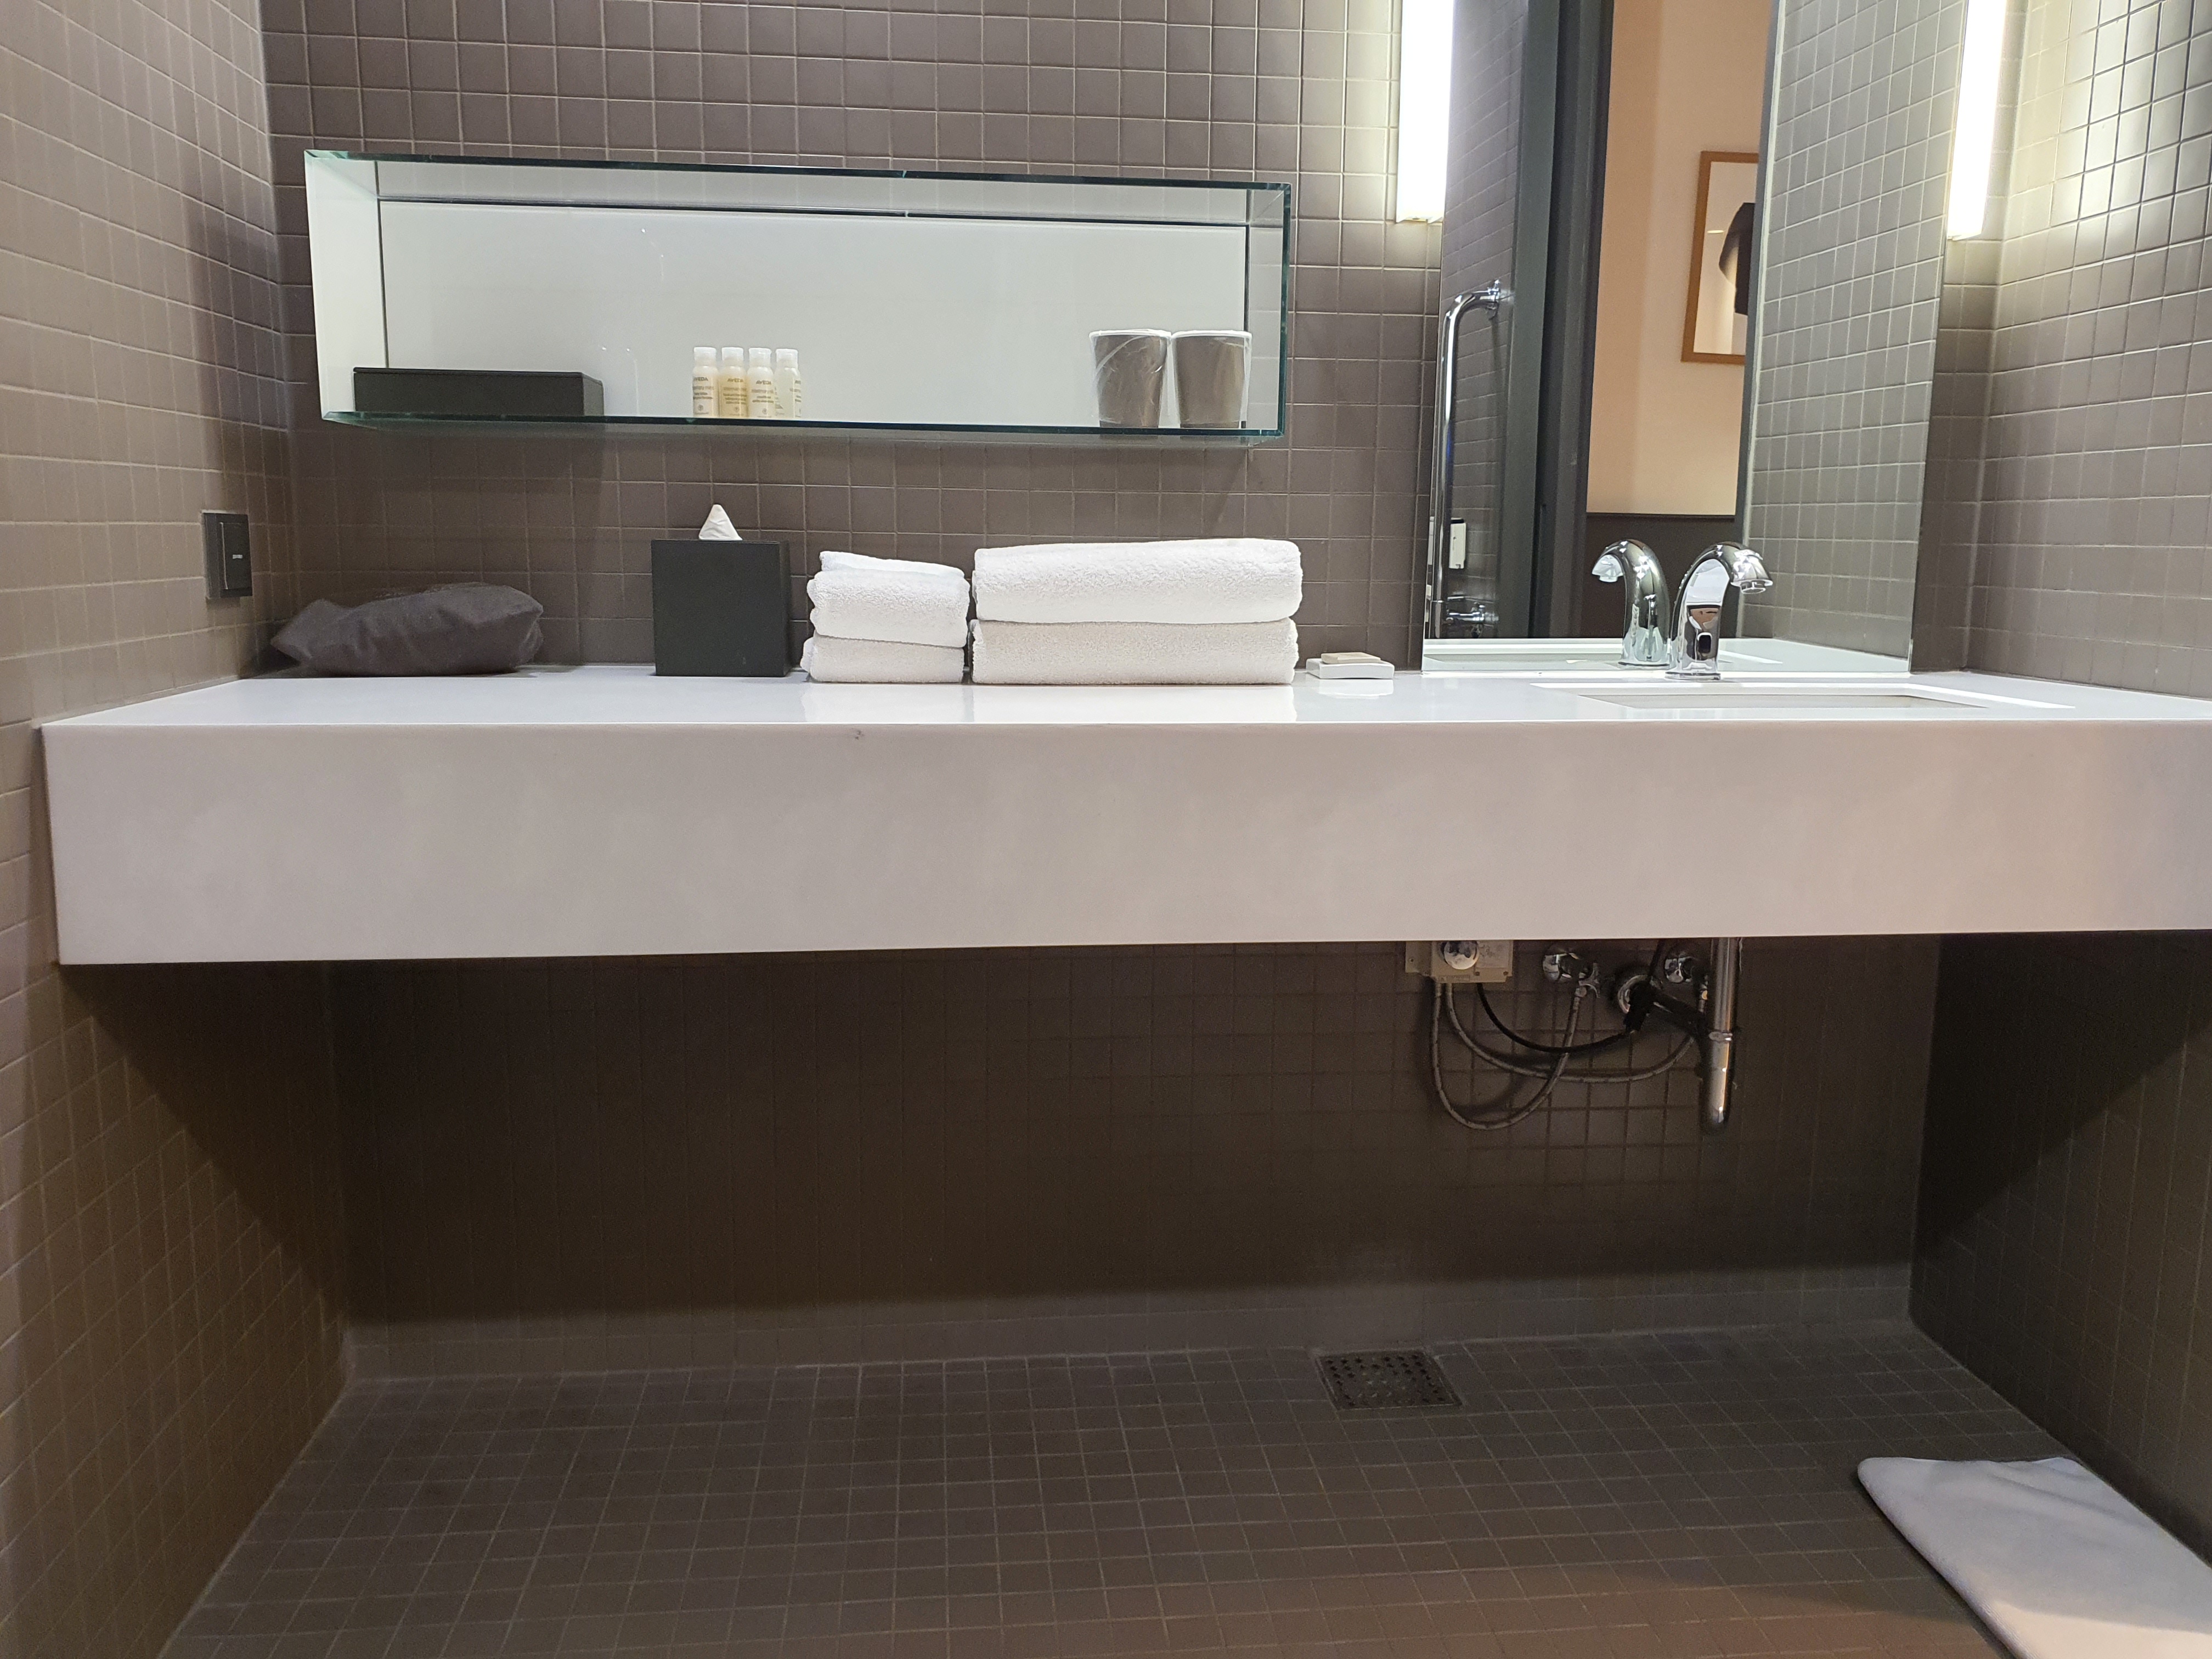 Bathroom in the guestroom 0 : A bathroom sink with a large lower space, taking up the entire wall on one side